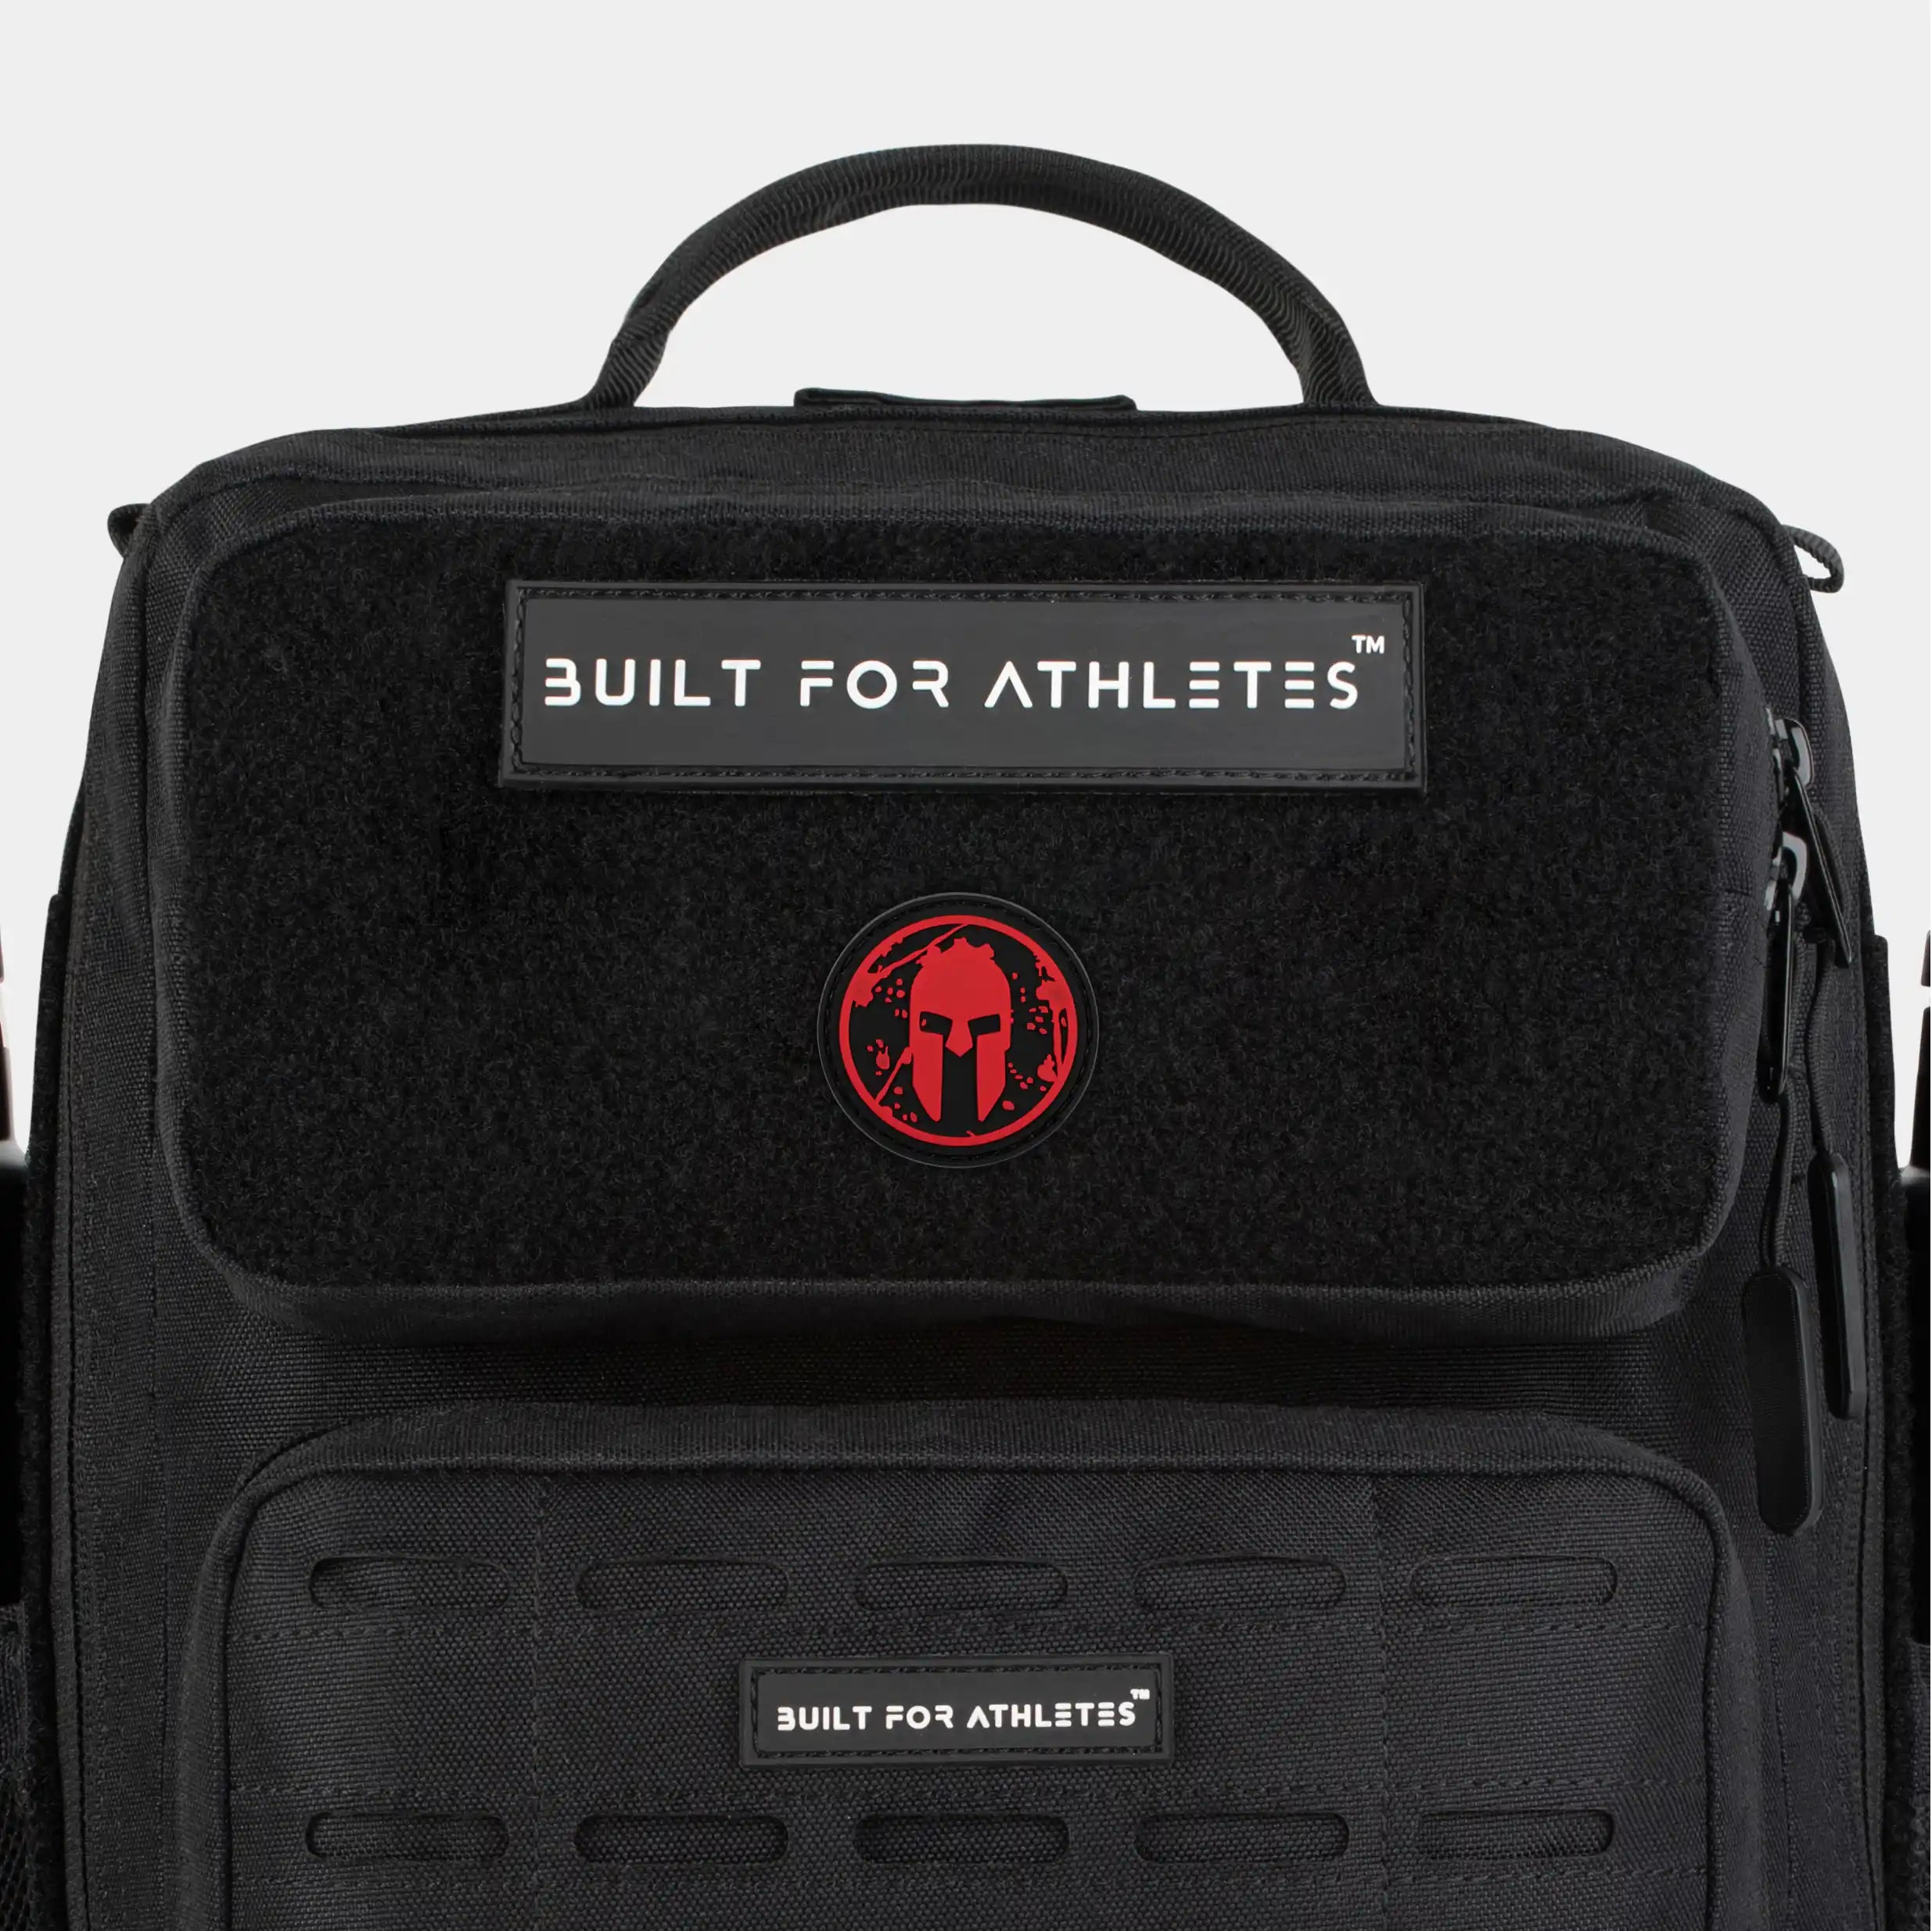 Built for Athletes Patches Spartan Patches